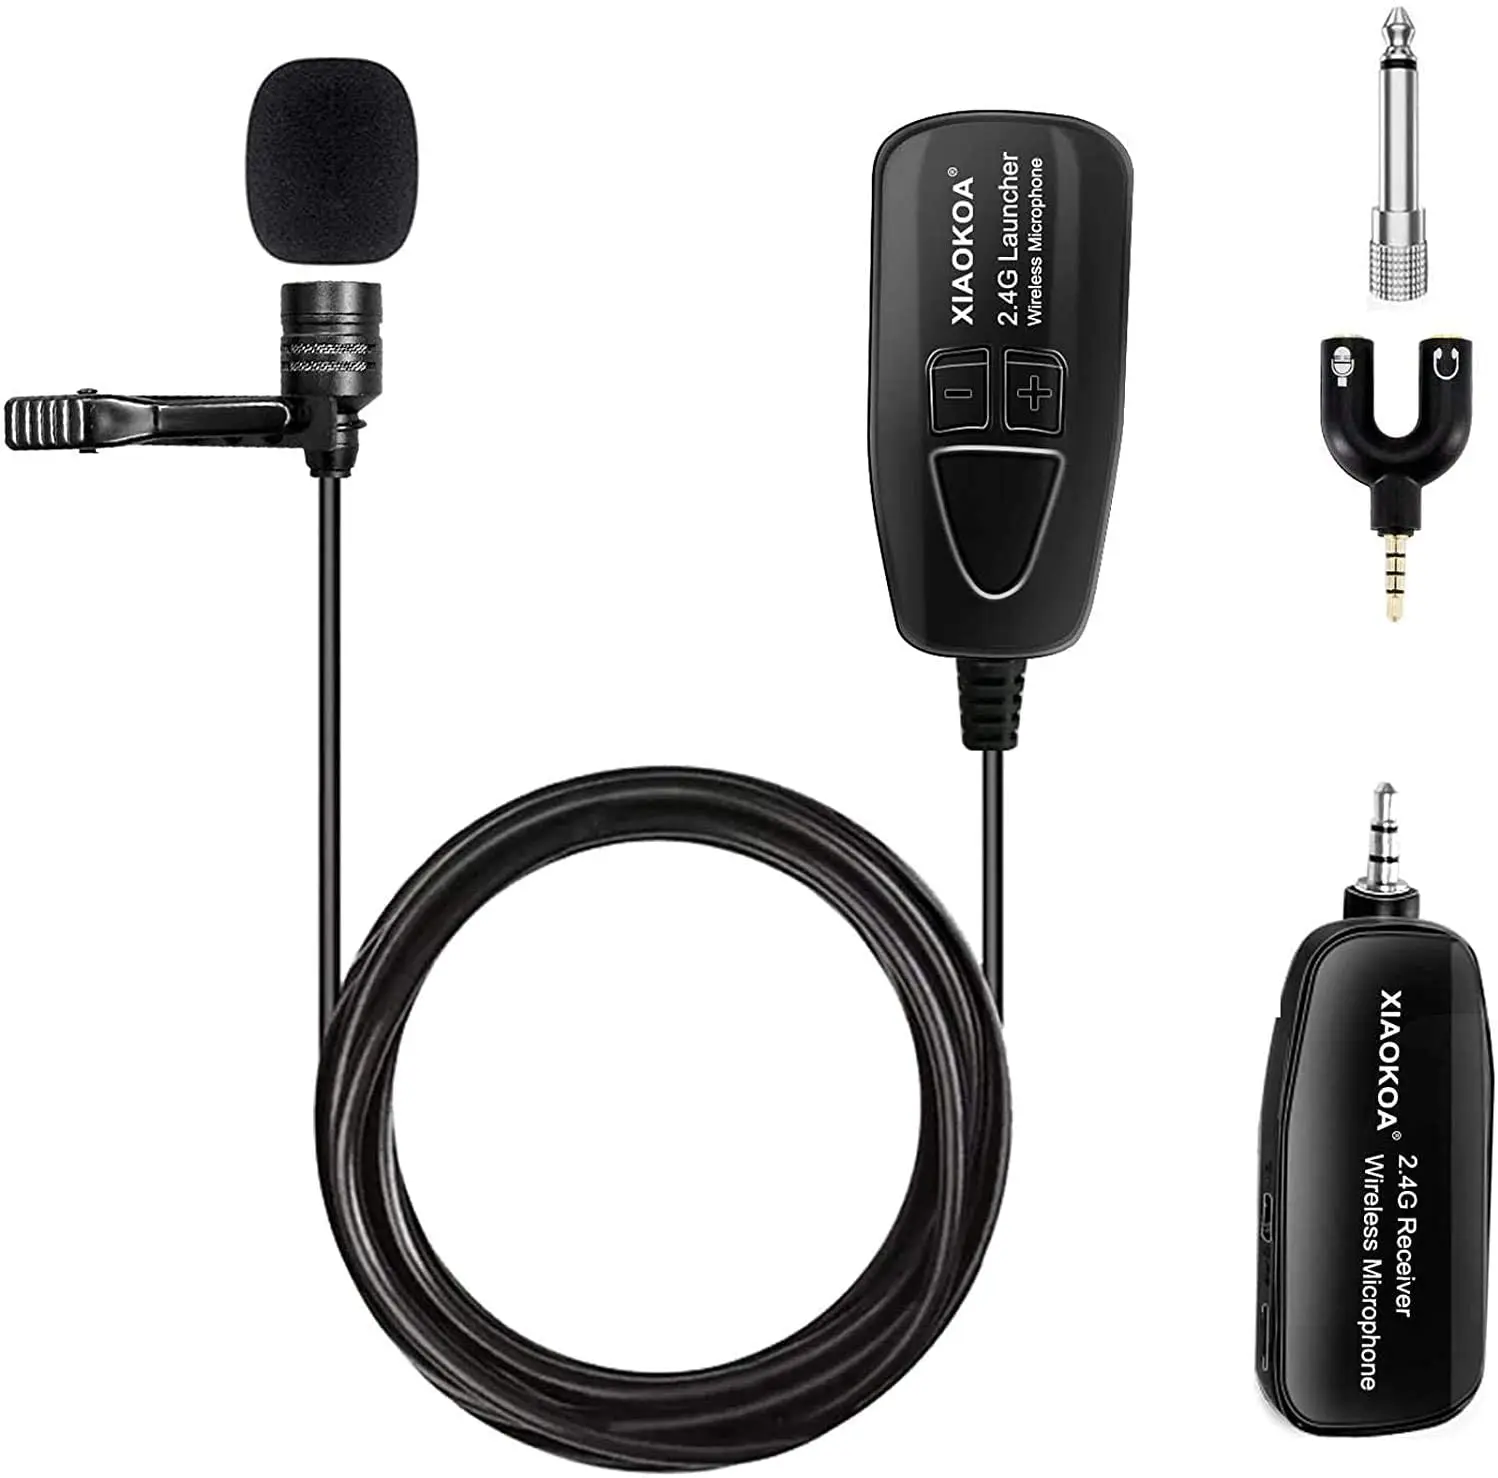 XIAOKOA Wireless Lavalier Microphone, 2.4G Wireless Microphone System with Lavalier Lapel Mics,Transmitter&ampReceiver for Confe